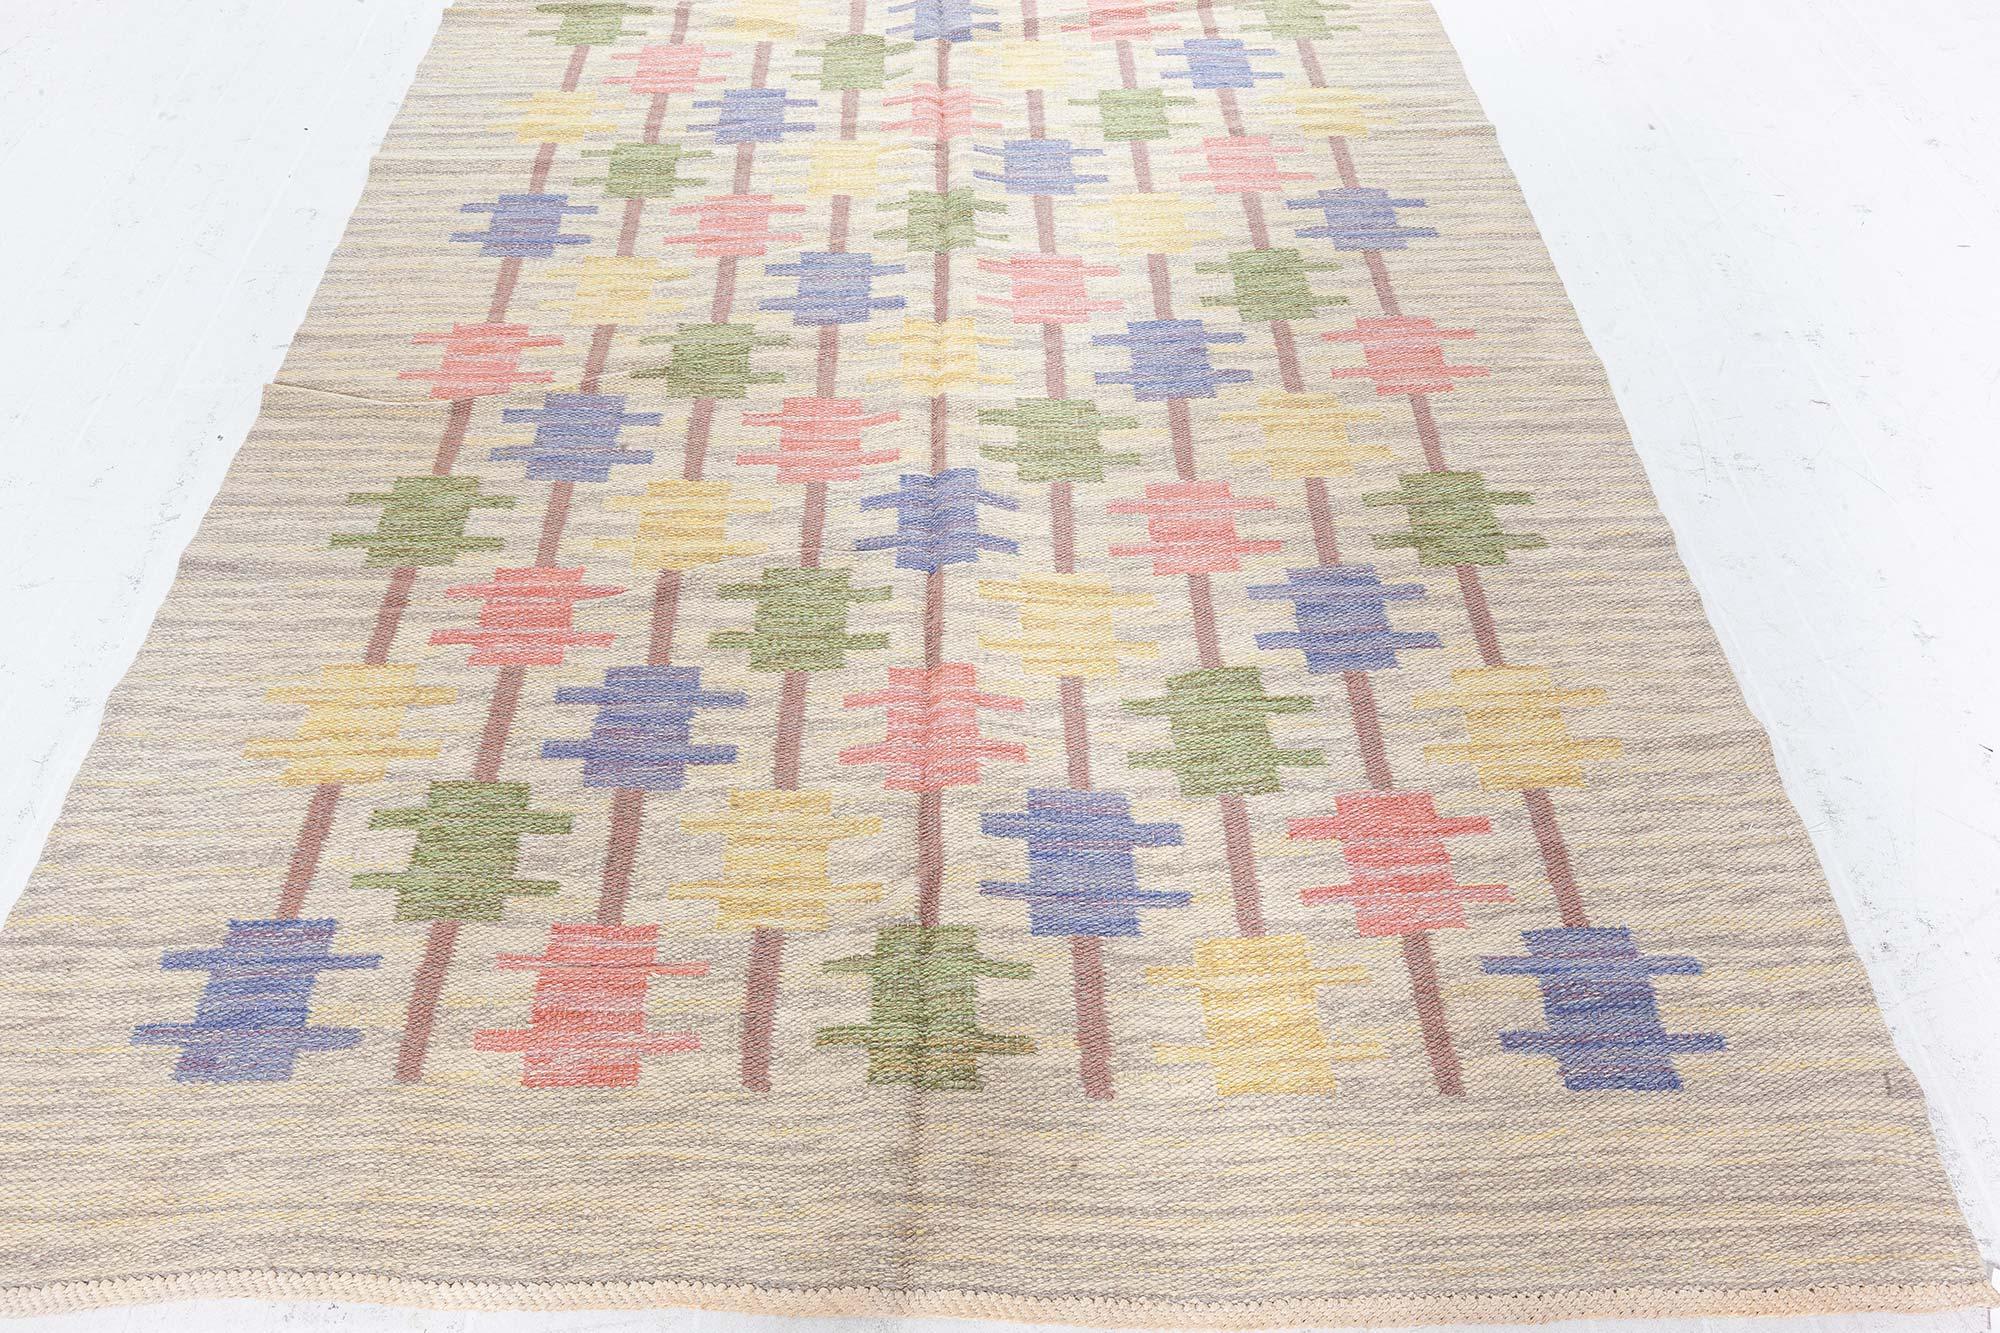 Mid-20th century Swedish beige, blue, green, red and gray flat-weave wool rug
Size: 5'5